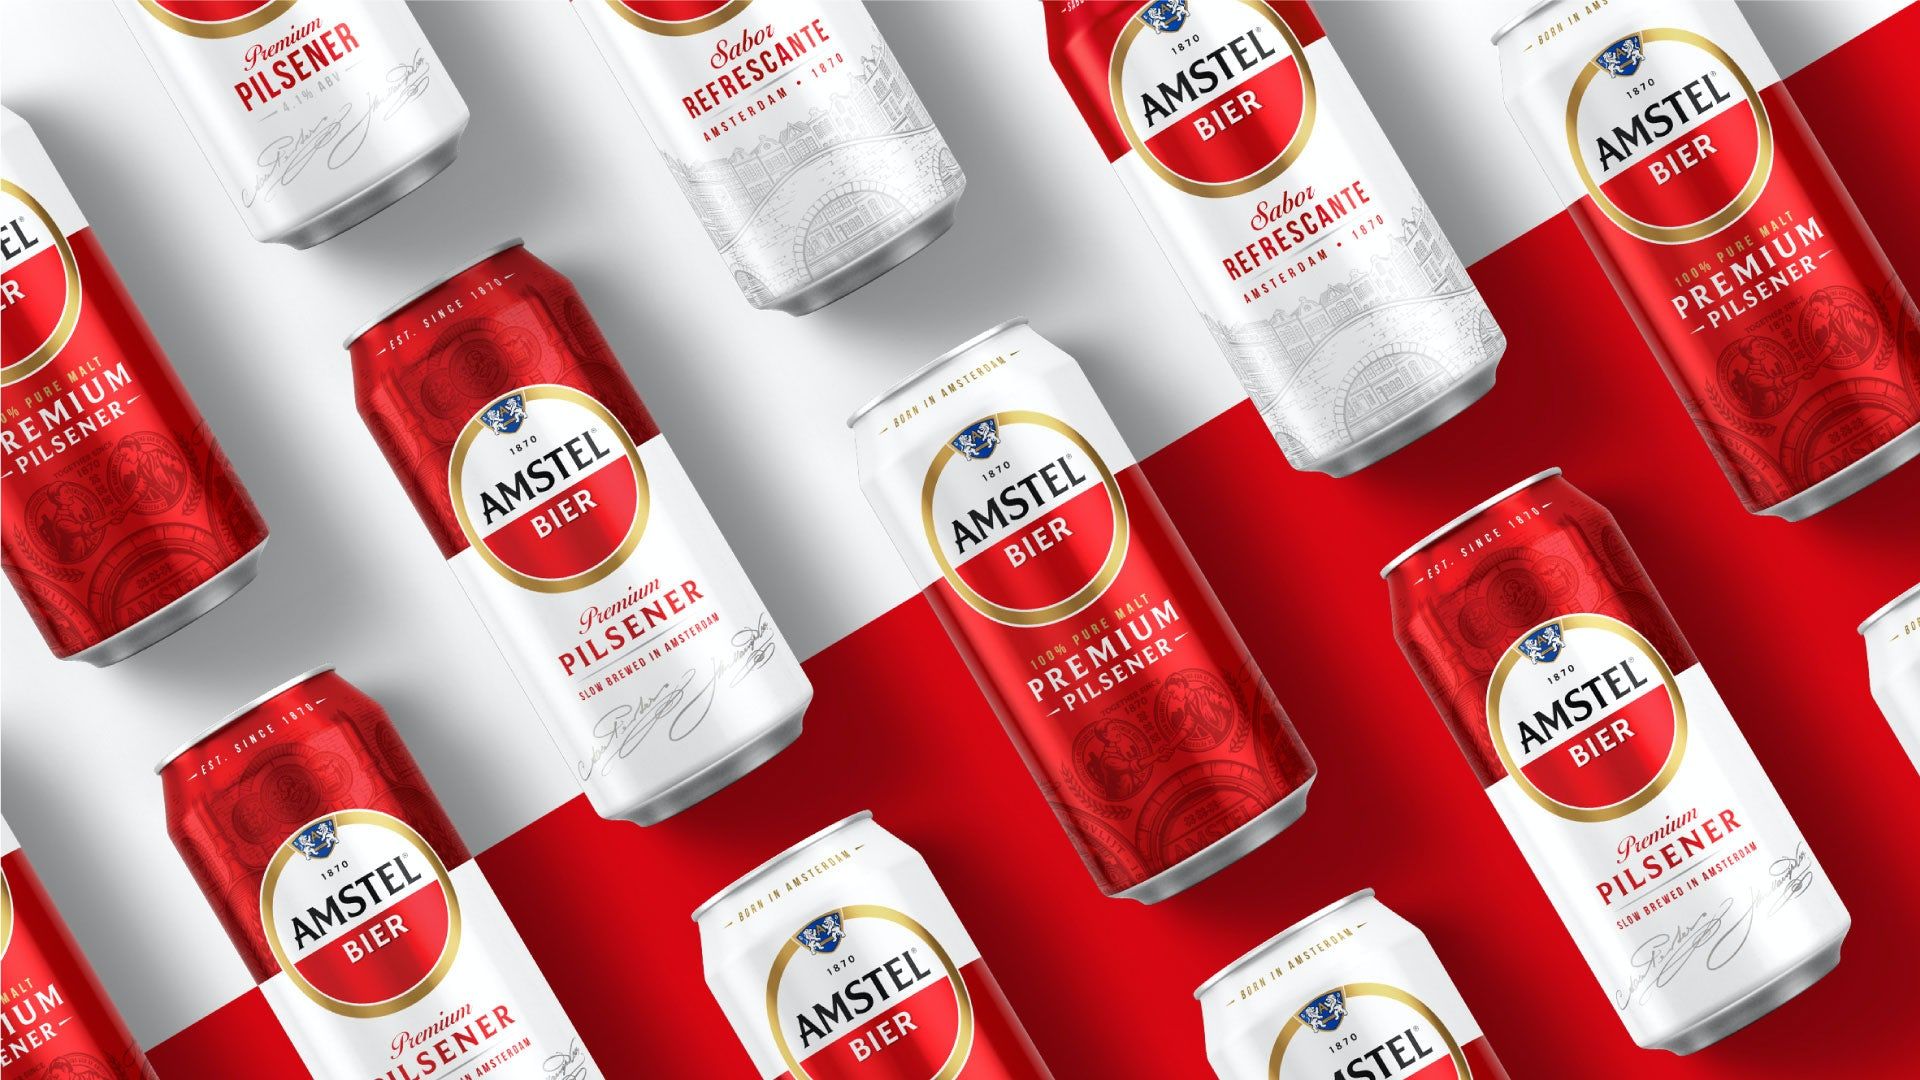 Amstel's new identity is designed for beer drinkers all over the world